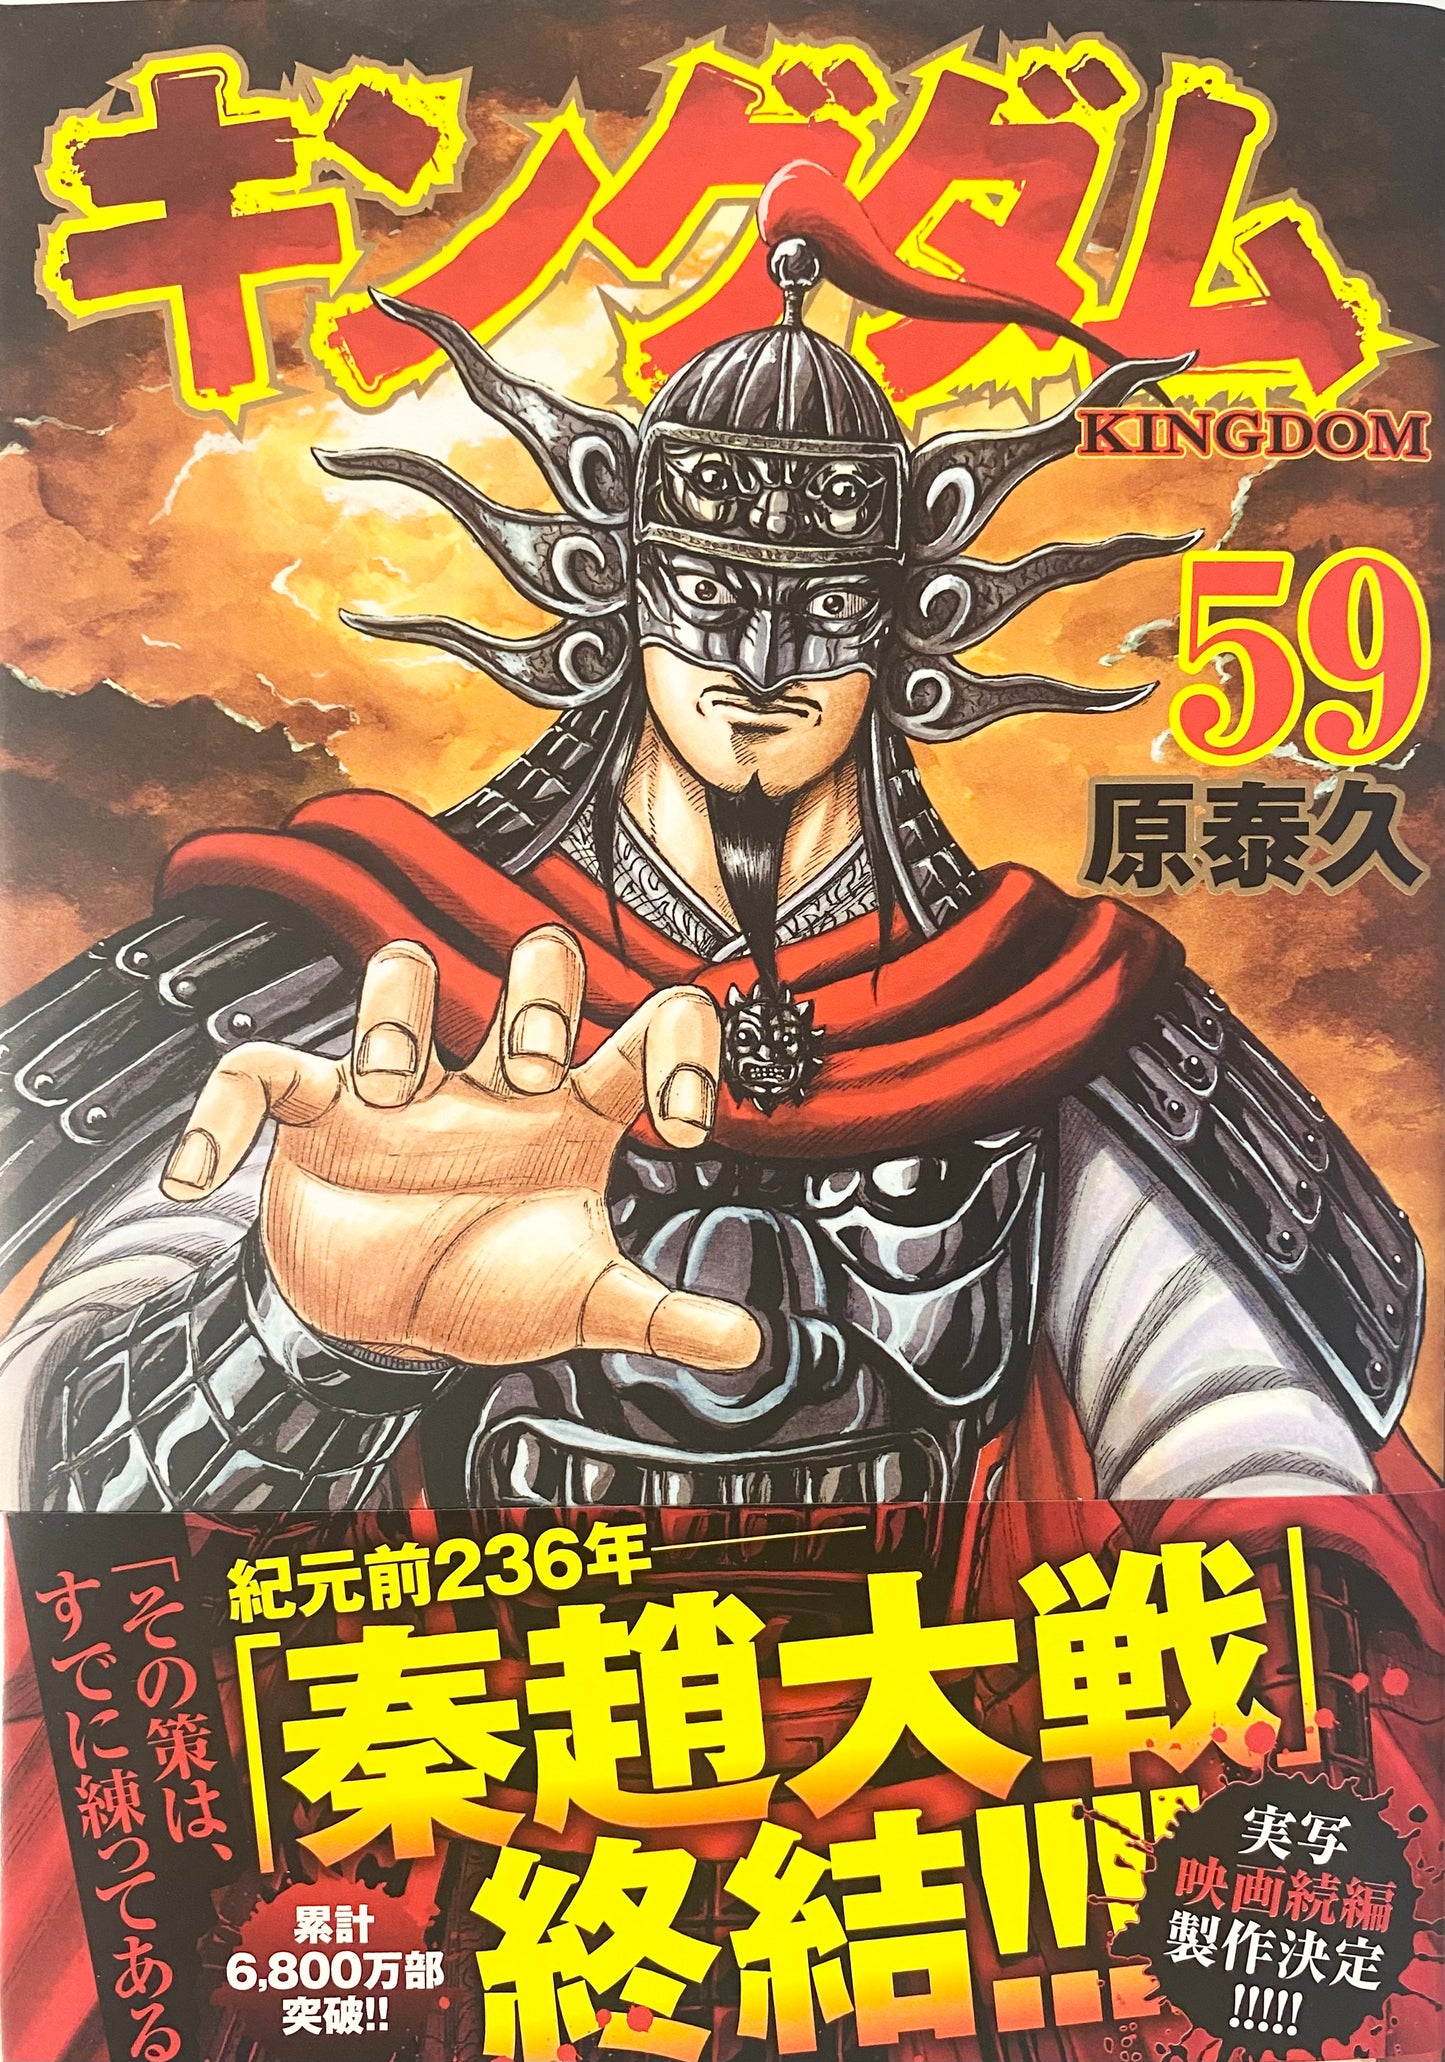 Kingdom Vol.59-Official Japanese Edition